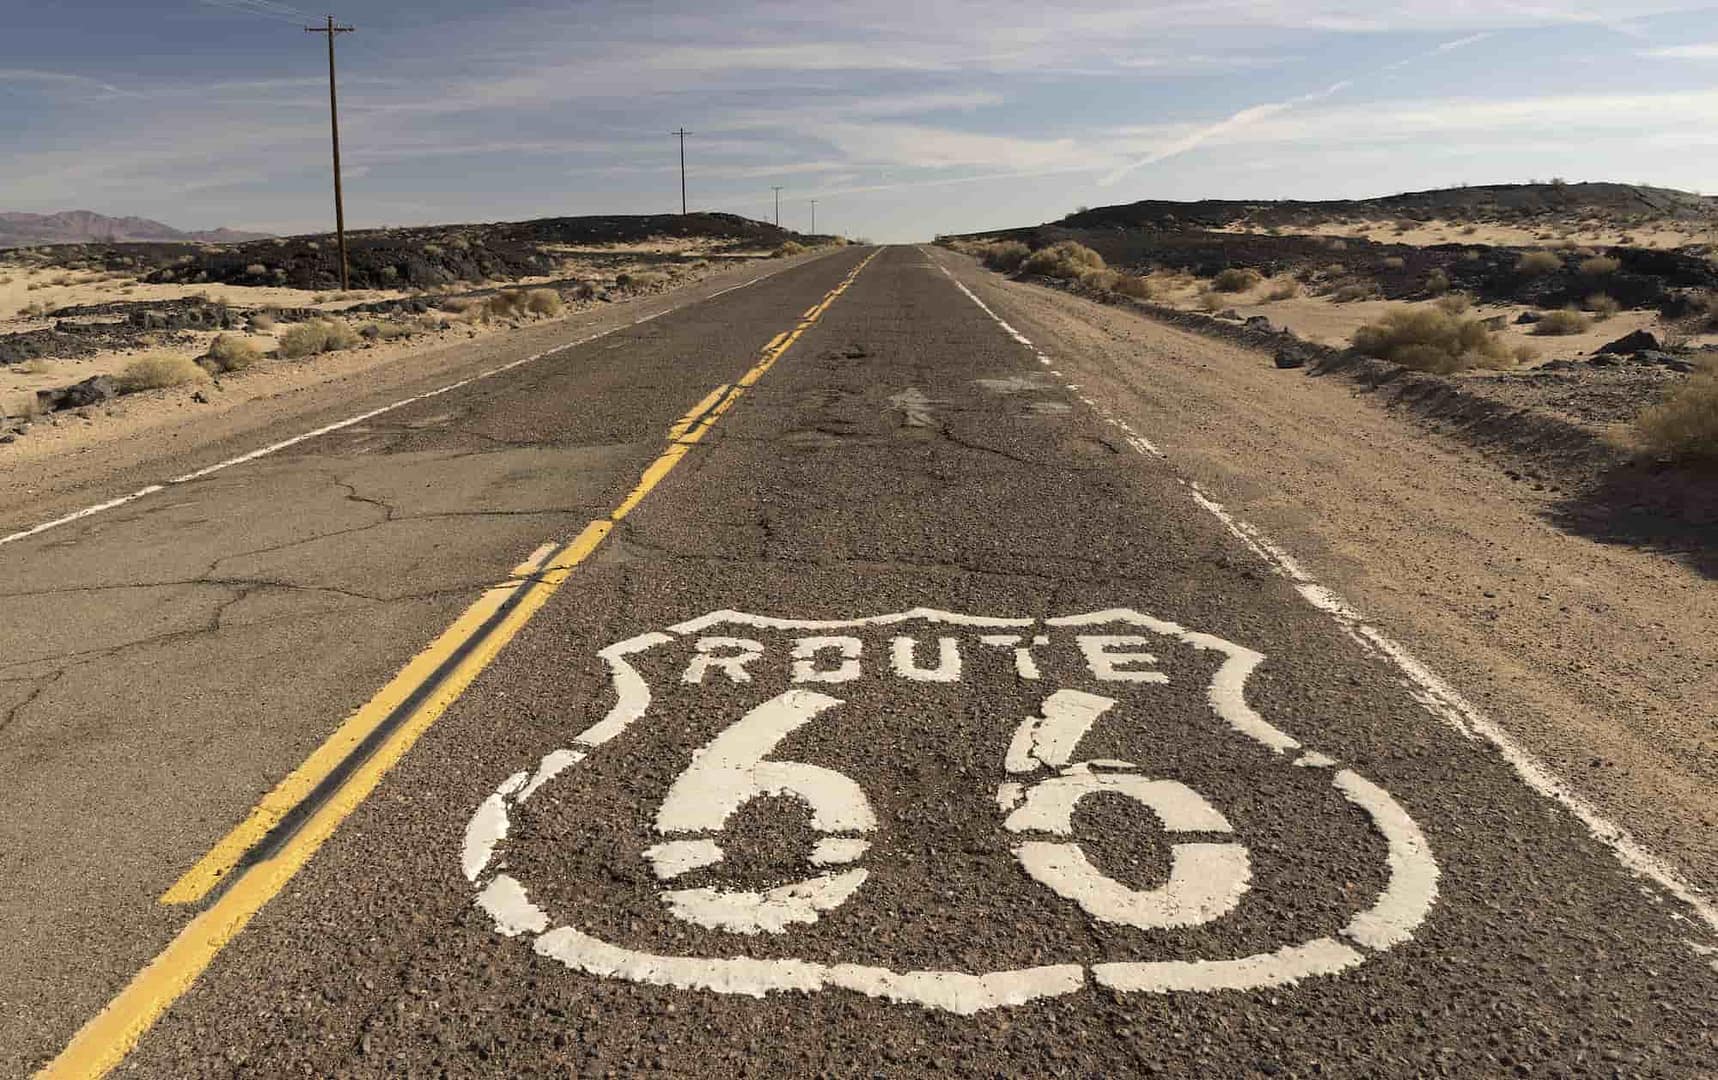 rural route 66 two lane historic highway cracked a 2021 08 26 22 38 09 utc 2000x1257 1